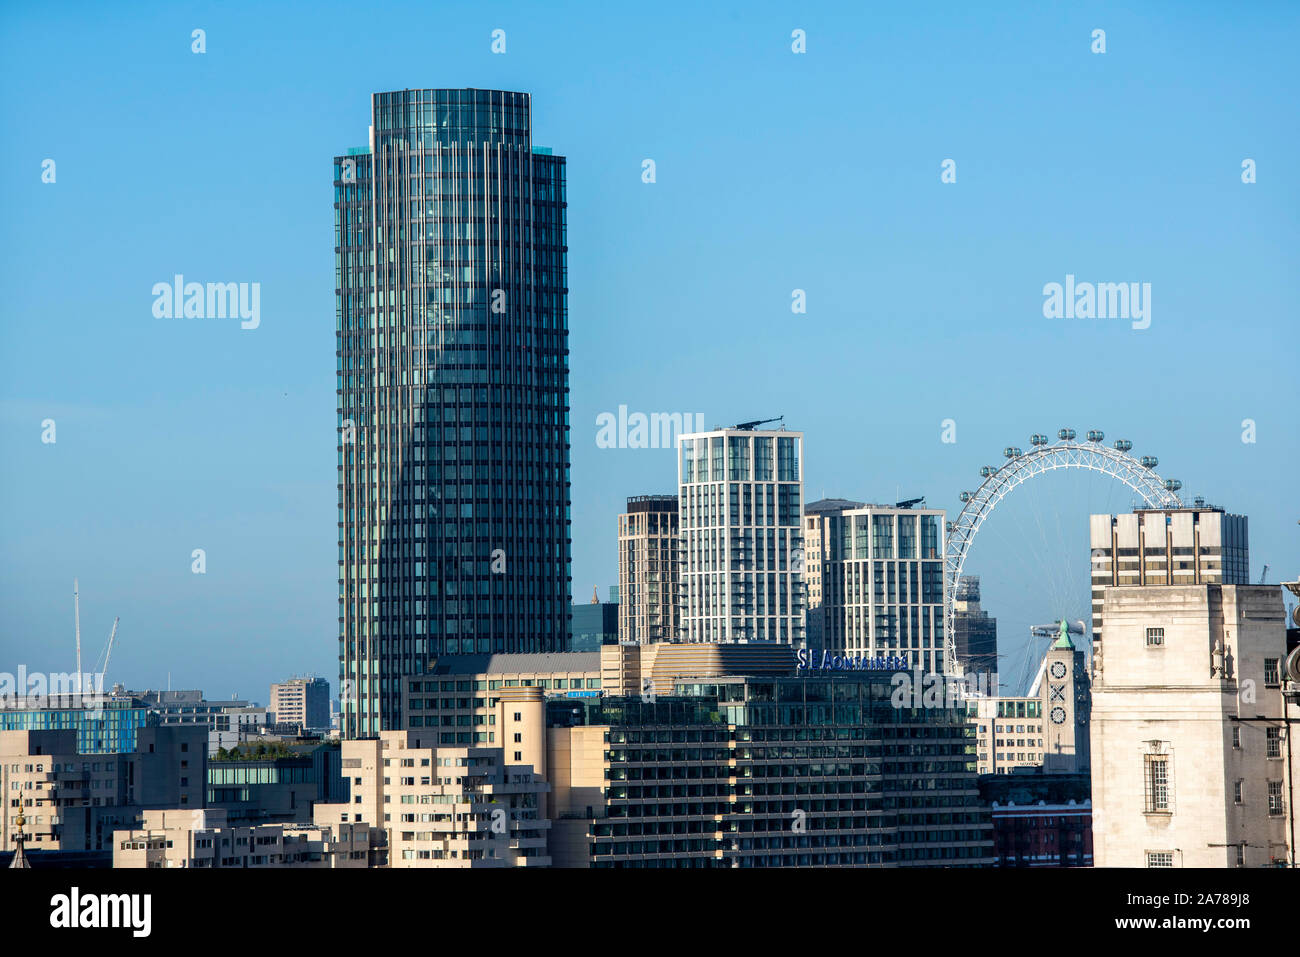 View from the Roof Terrace of the One New Change Development in London, England UK Stock Photo